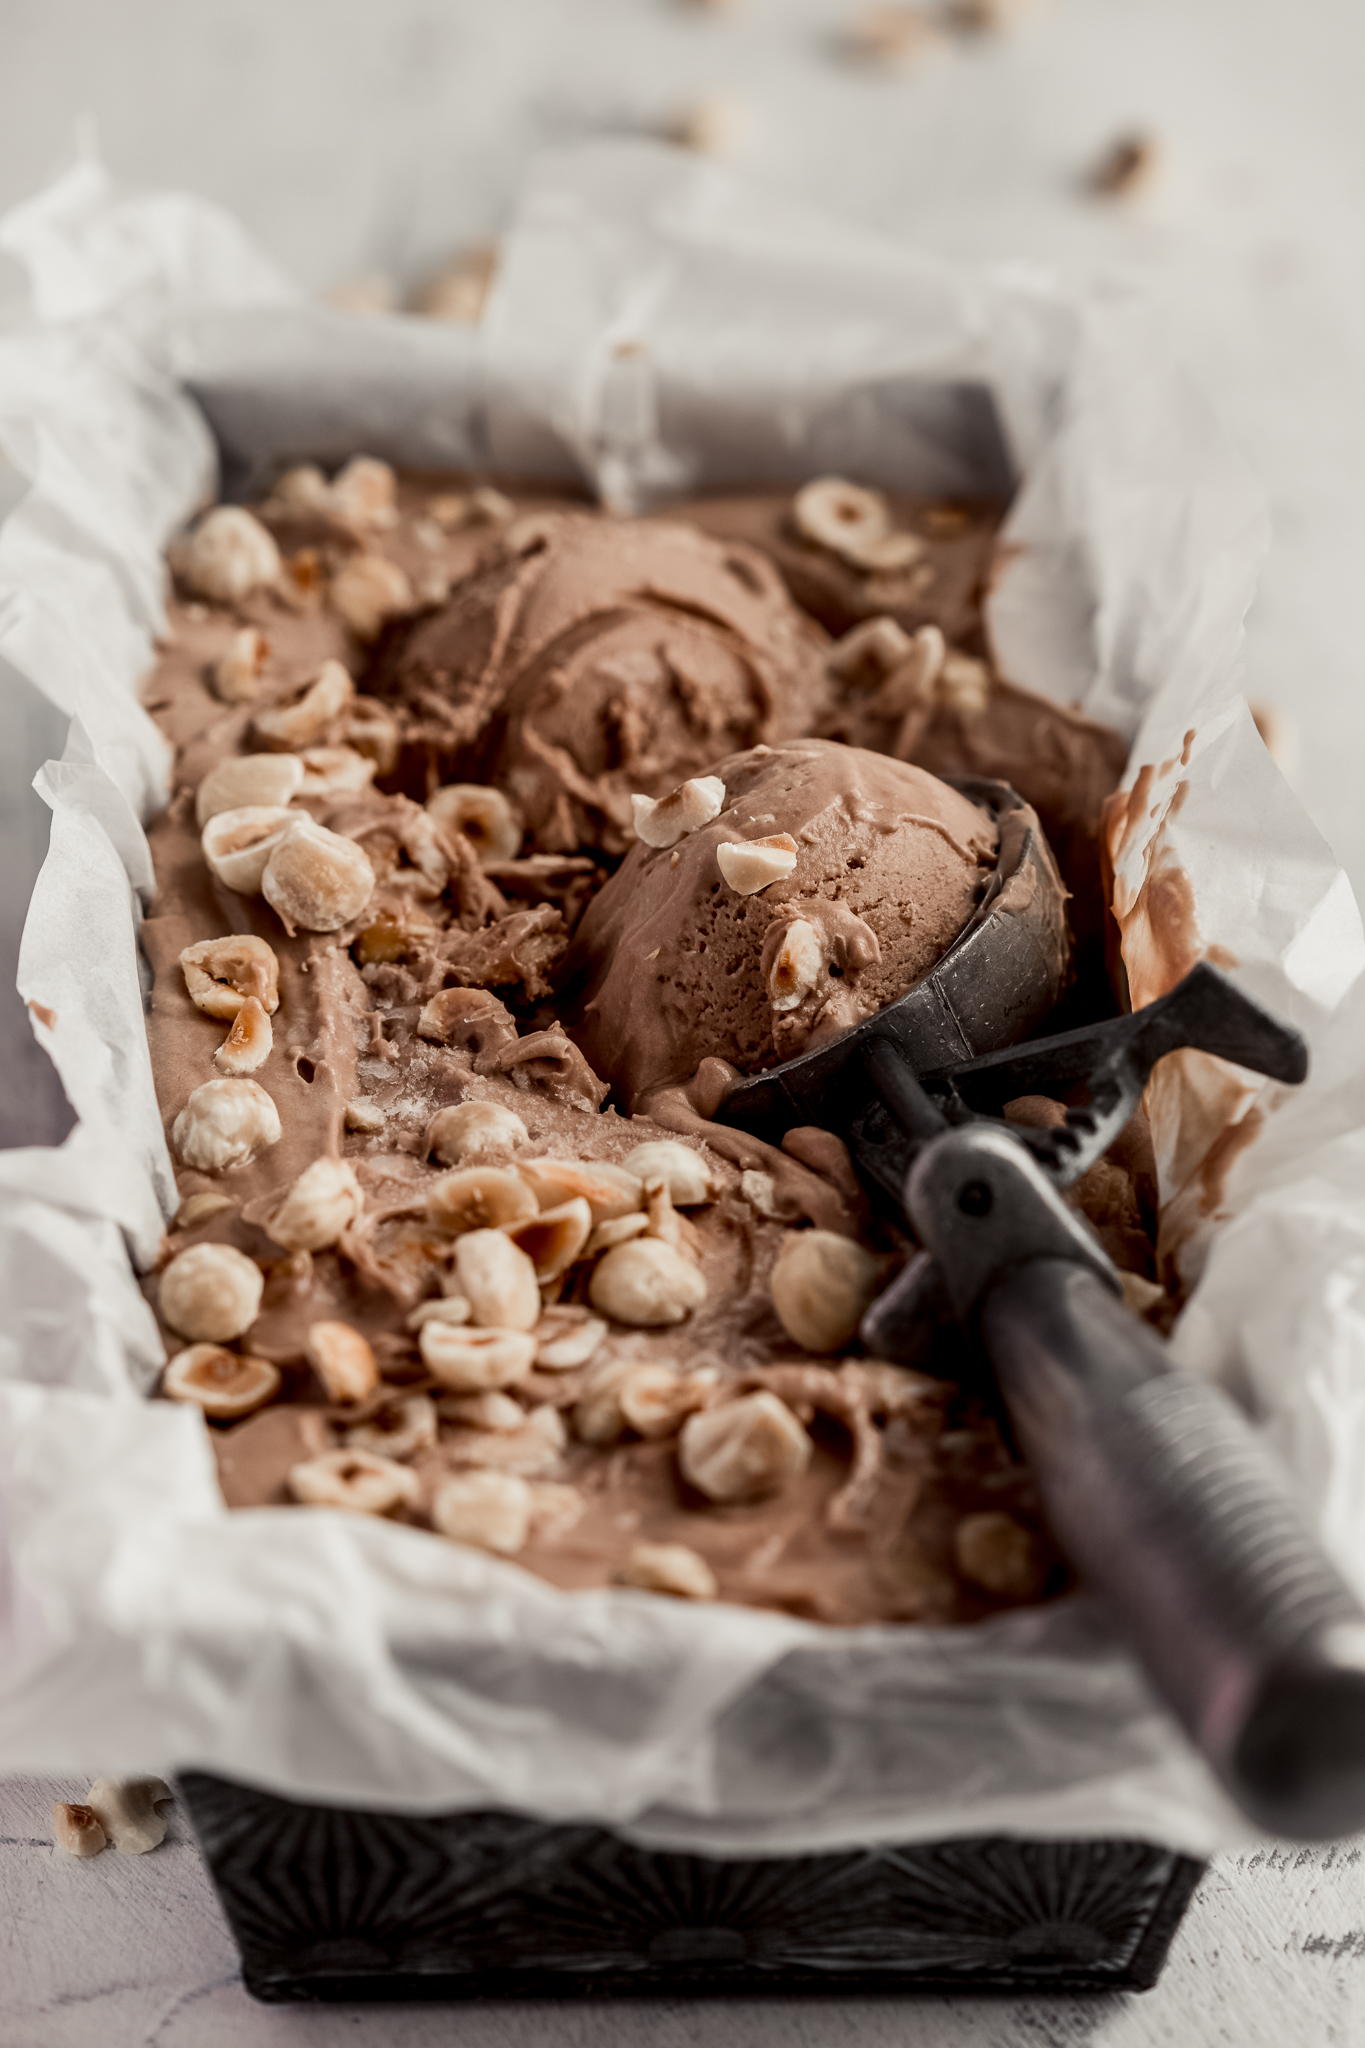 vintage scoop in nutella ice cream with roasted hazelnuts